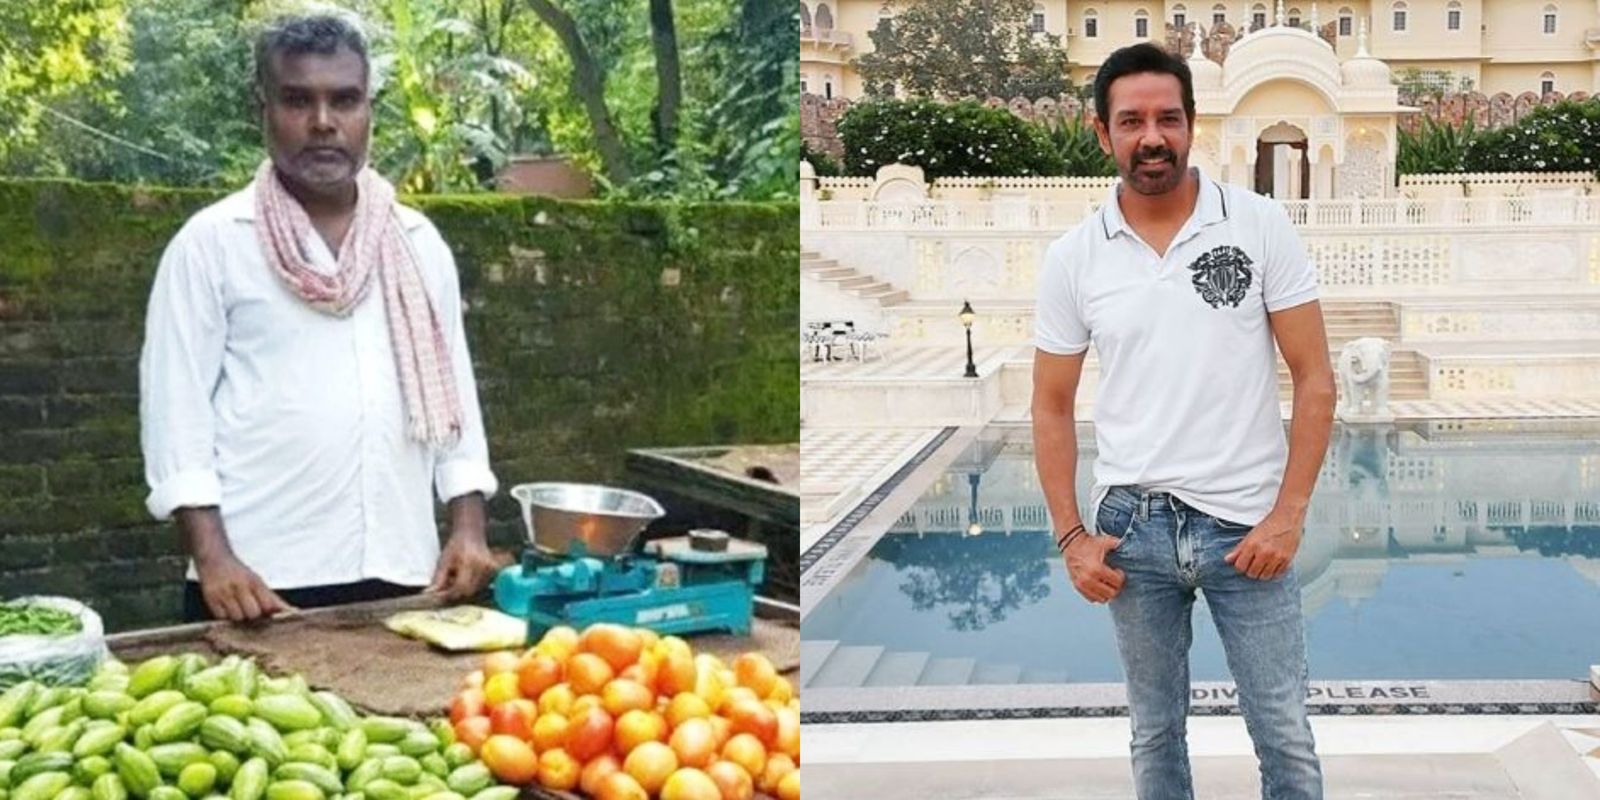 Balika Vadhu Unit Director Now Selling Vegetables In His Hometown, Anup Soni And Show's Team Vow To Help